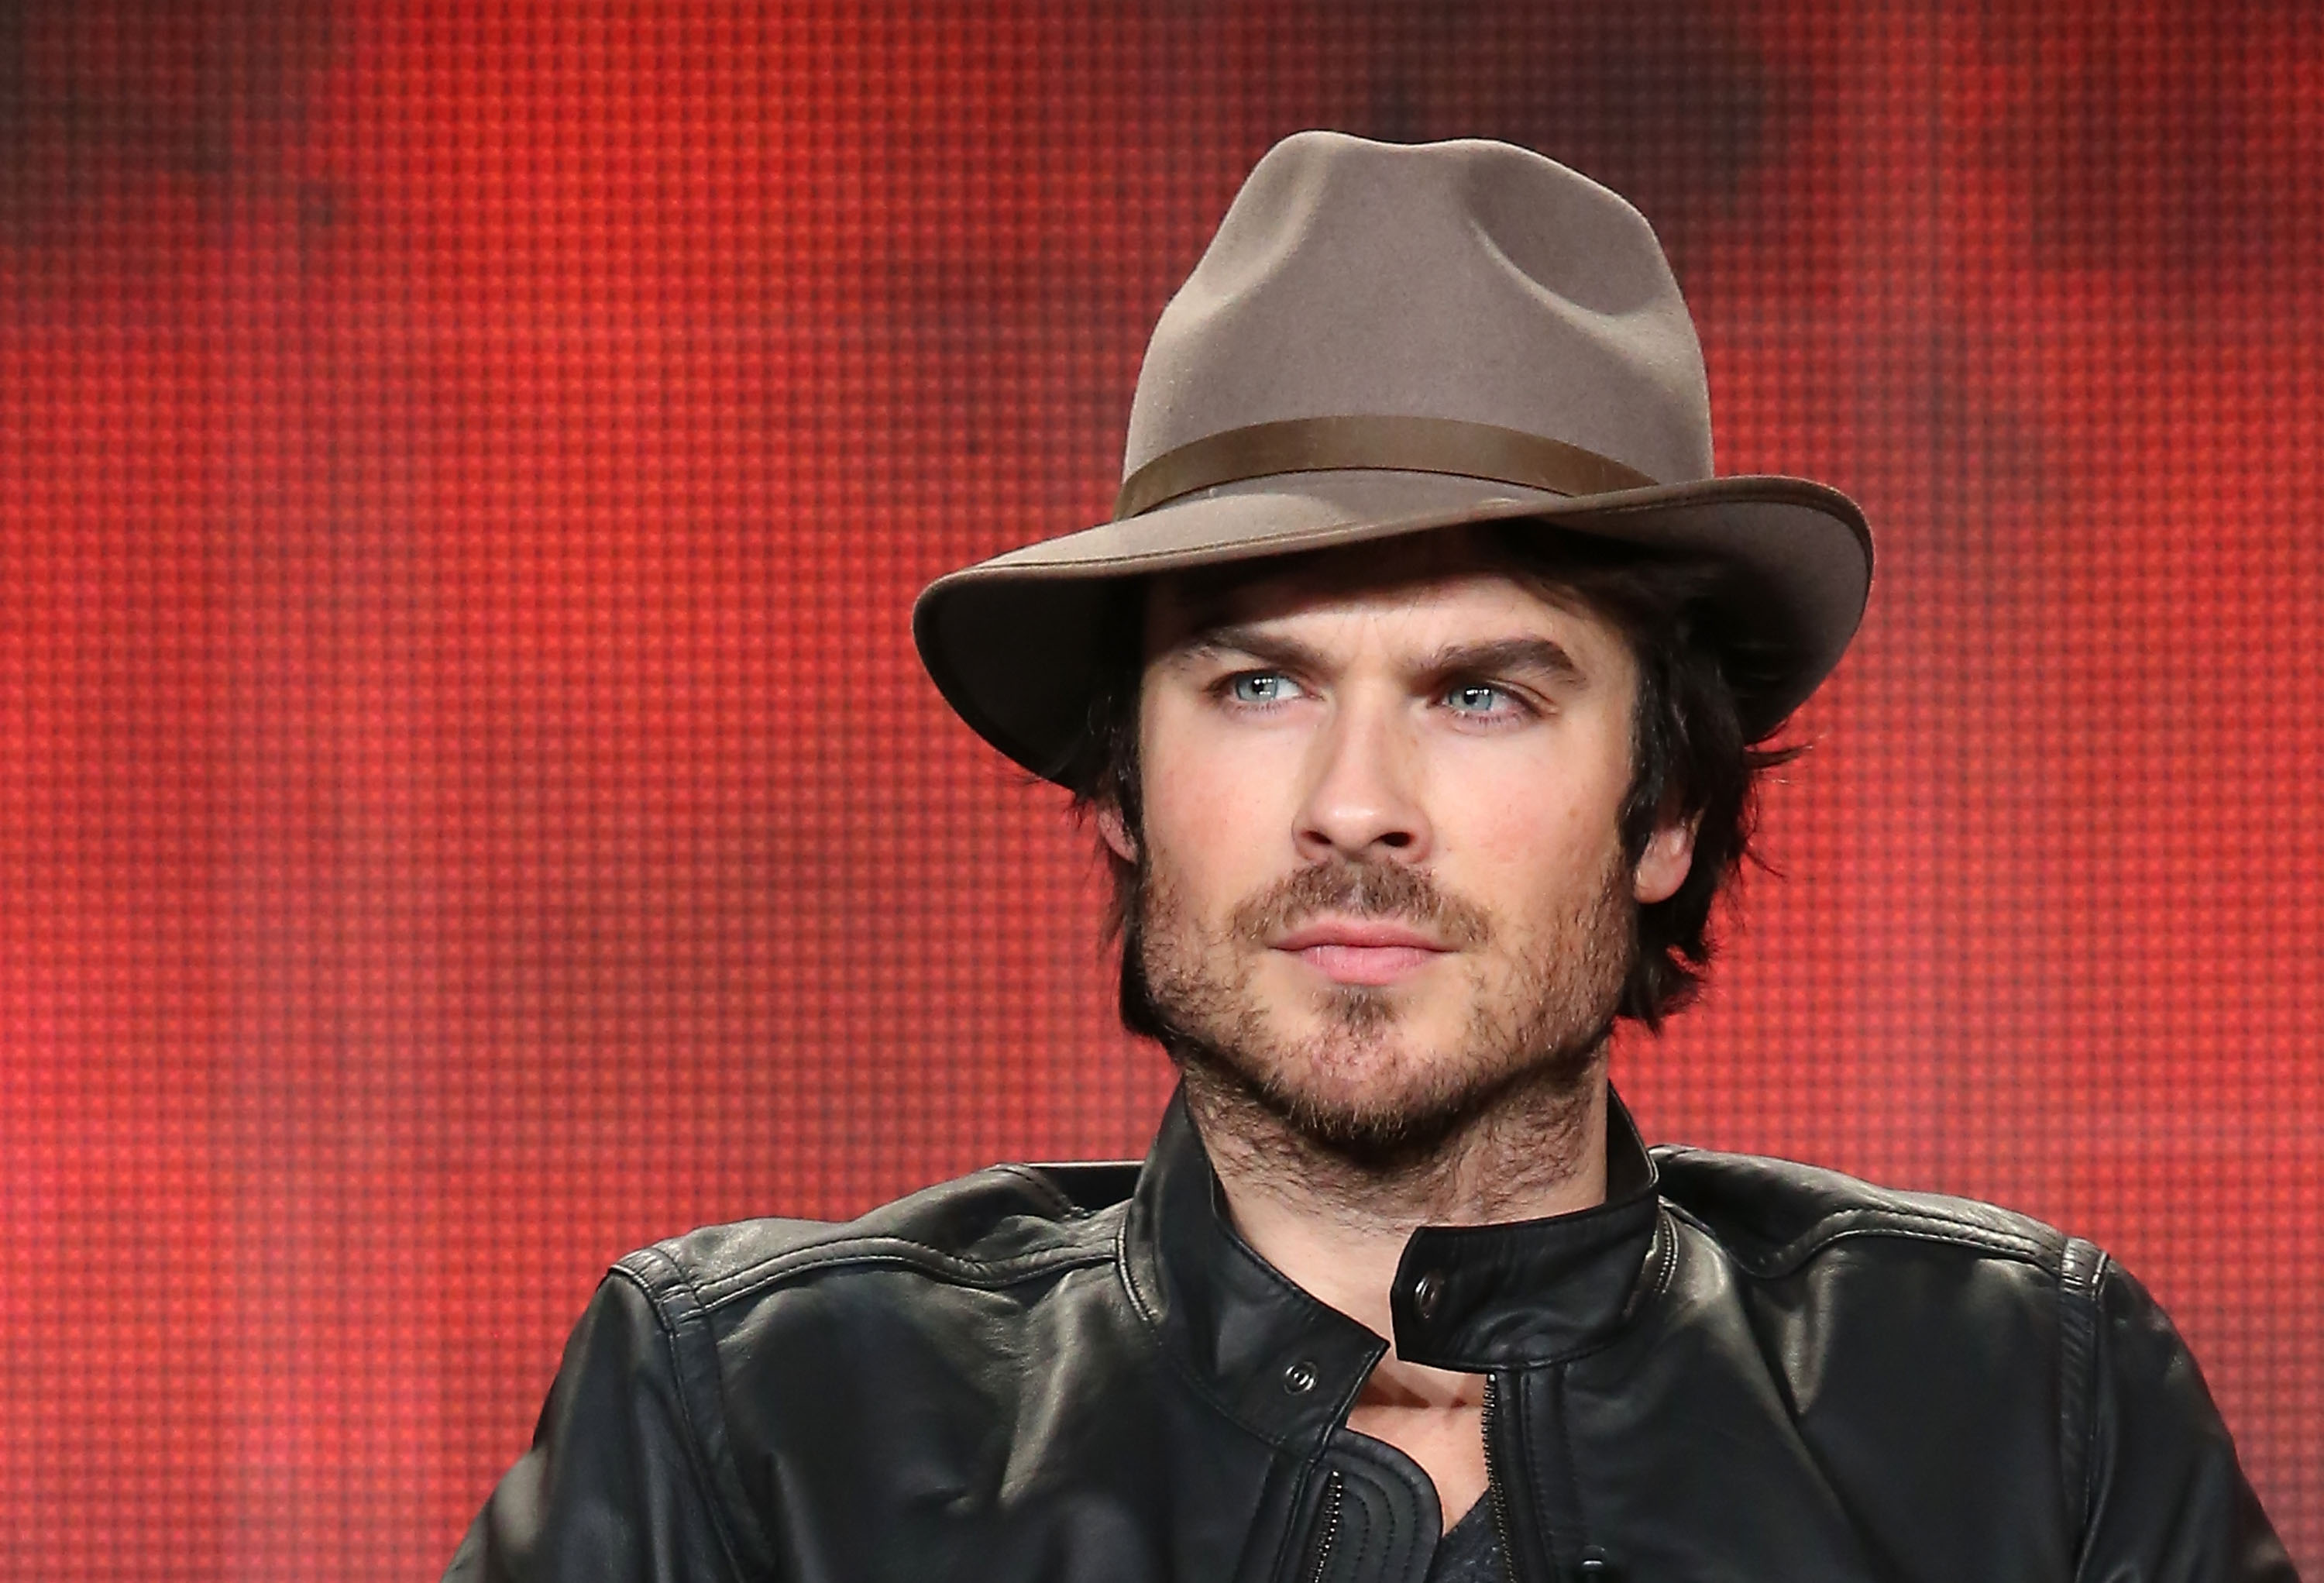 PASADENA, CA - JANUARY 11: Actor Ian Somerhalder speaks onstage during the 'The Vampire Diaries' and 'The Originals' panel as part of The CW 2015 Winter Television Critics Association press tour at the Langham Huntington Hotel & Spa on January 11, 2015 in Pasadena, California. (Photo by Frederick M. Brown/Getty Images)